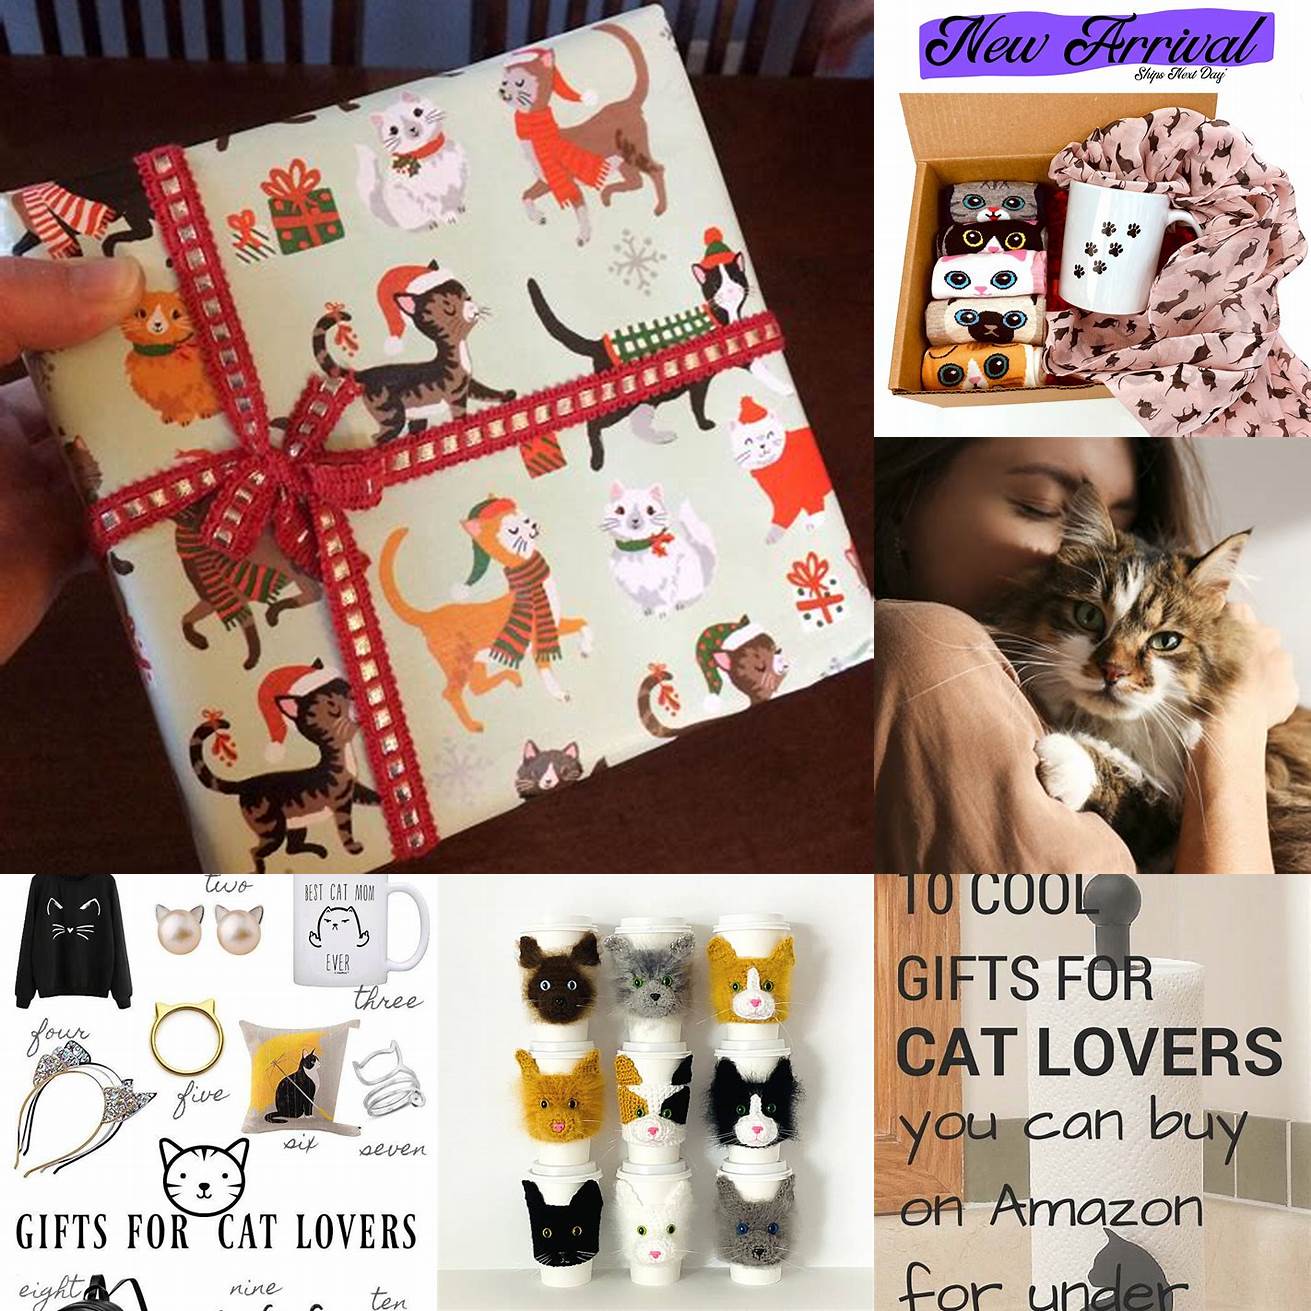 Gift them to your cat-loving friends